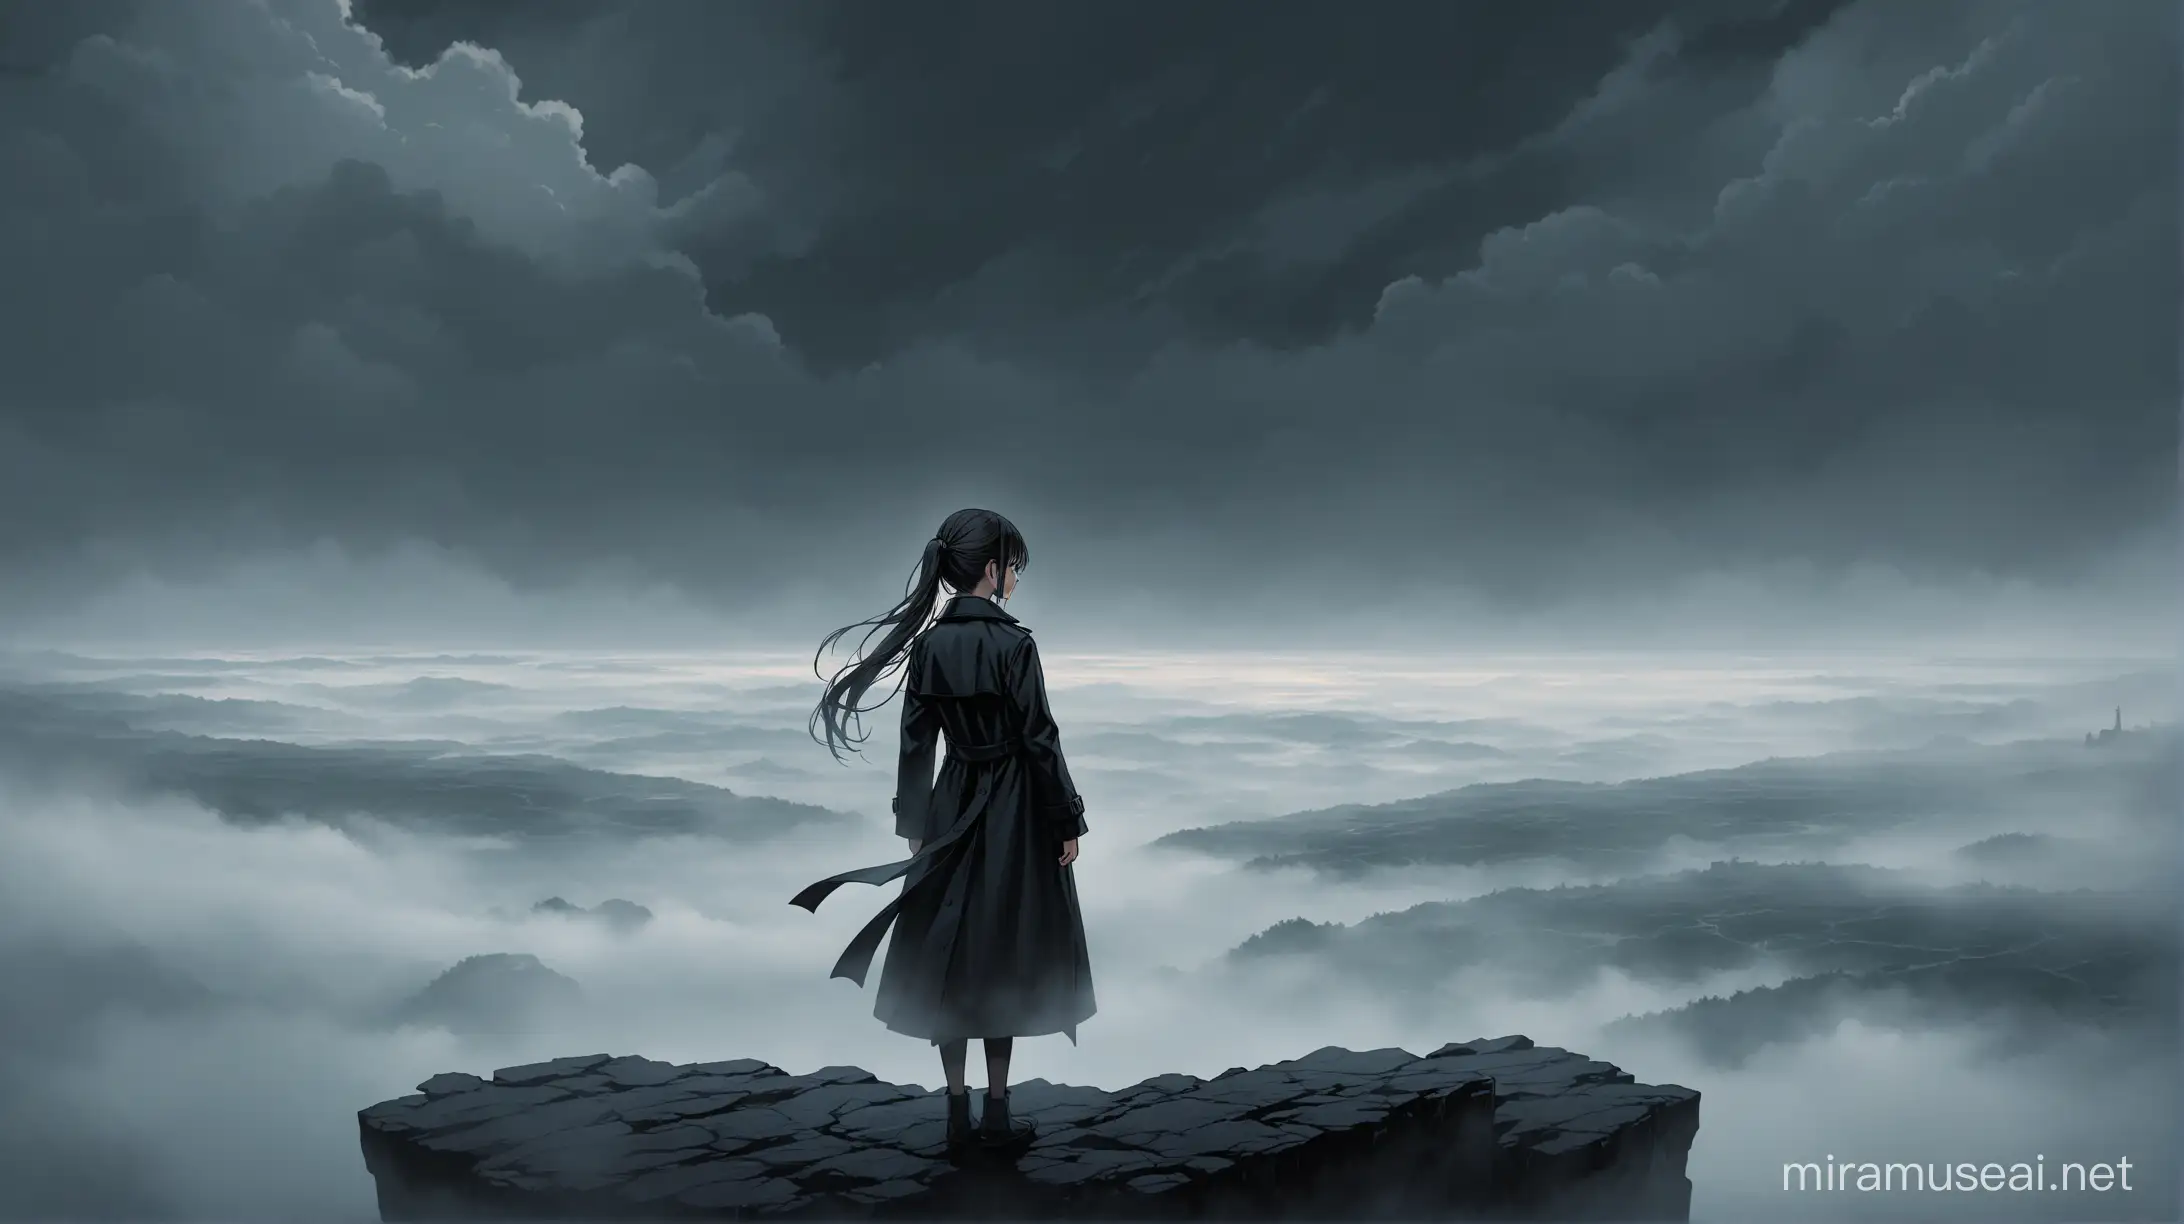 Mysterious Girl in Black Trench Coat Stands on Cliff Edge Amidst Gloomy Clouds